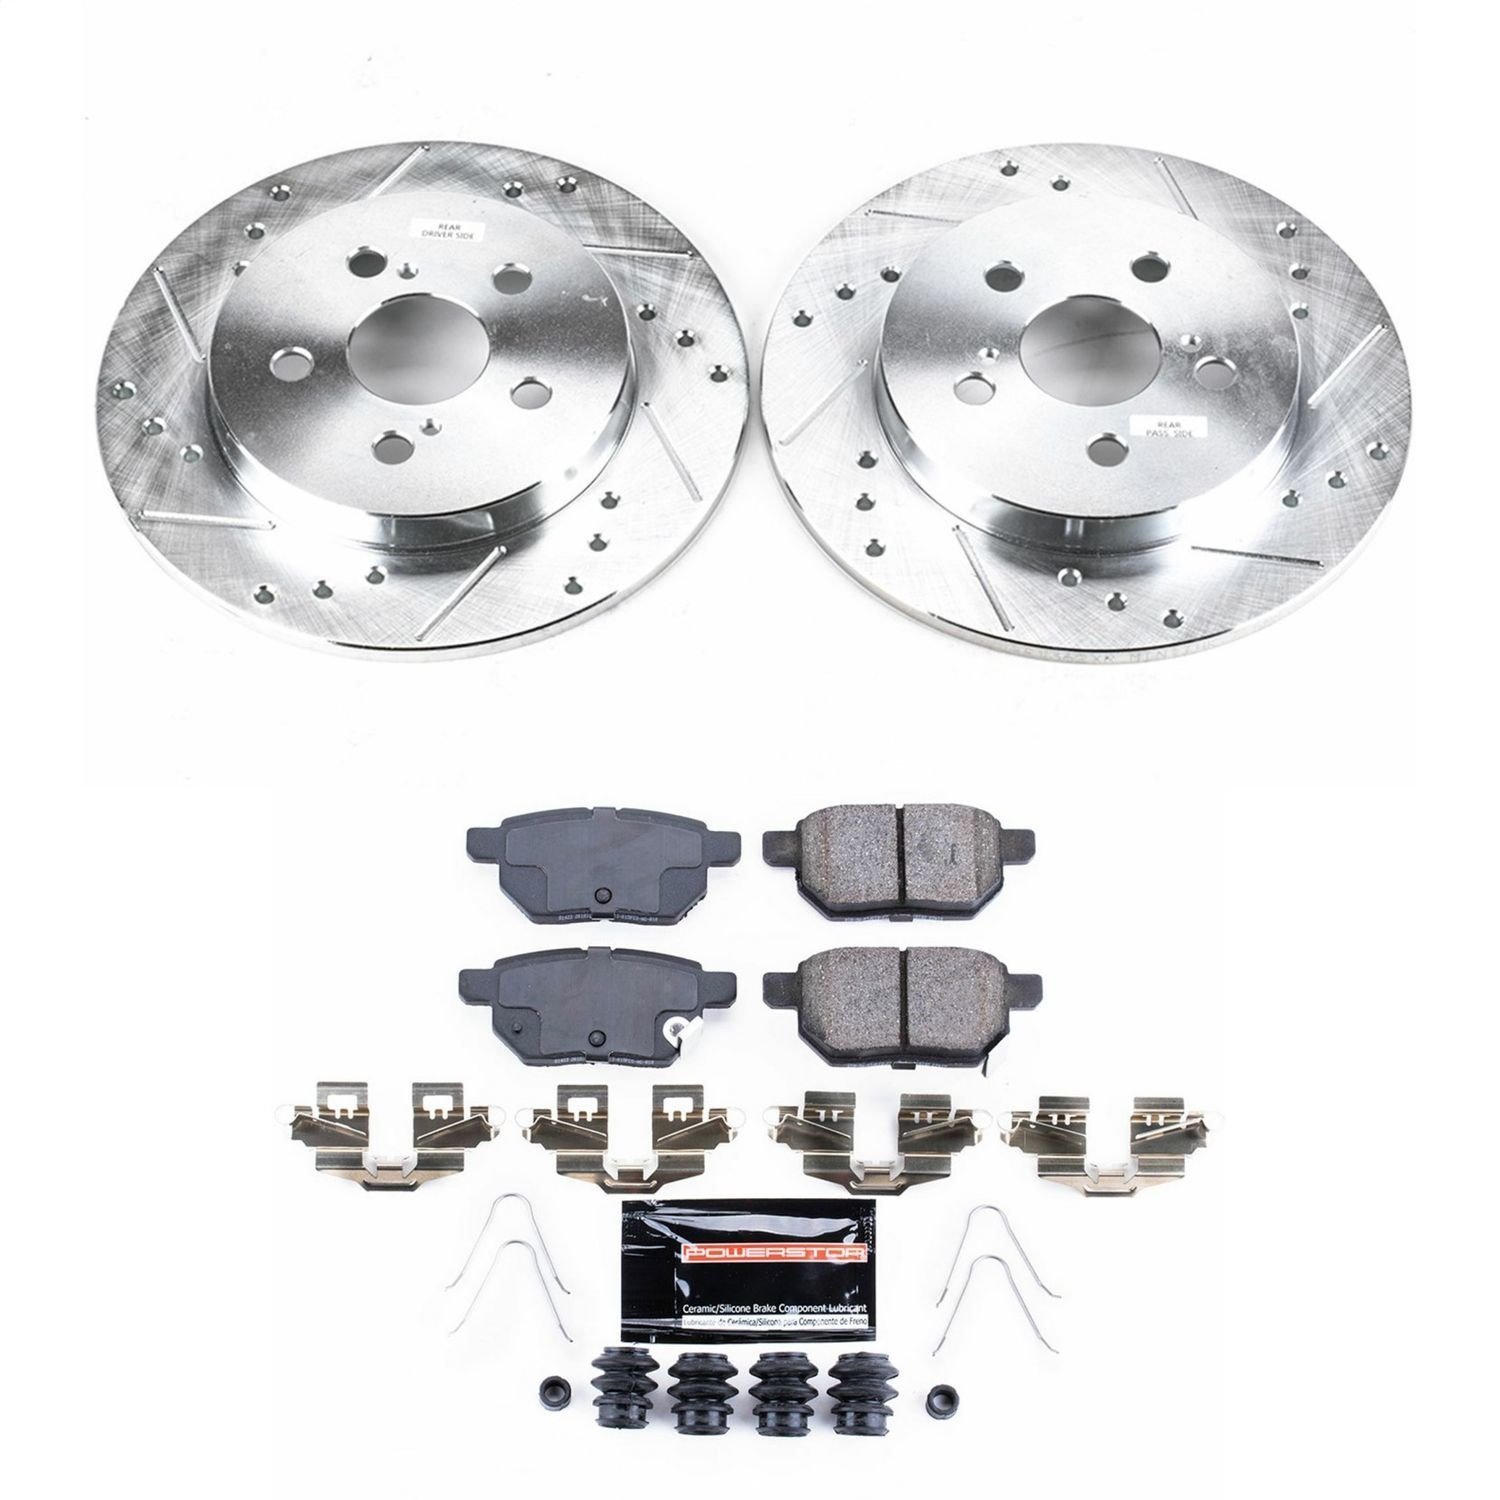 High Performance Brake Upgrade Kit Cross-Drilled and Slotted Rotors